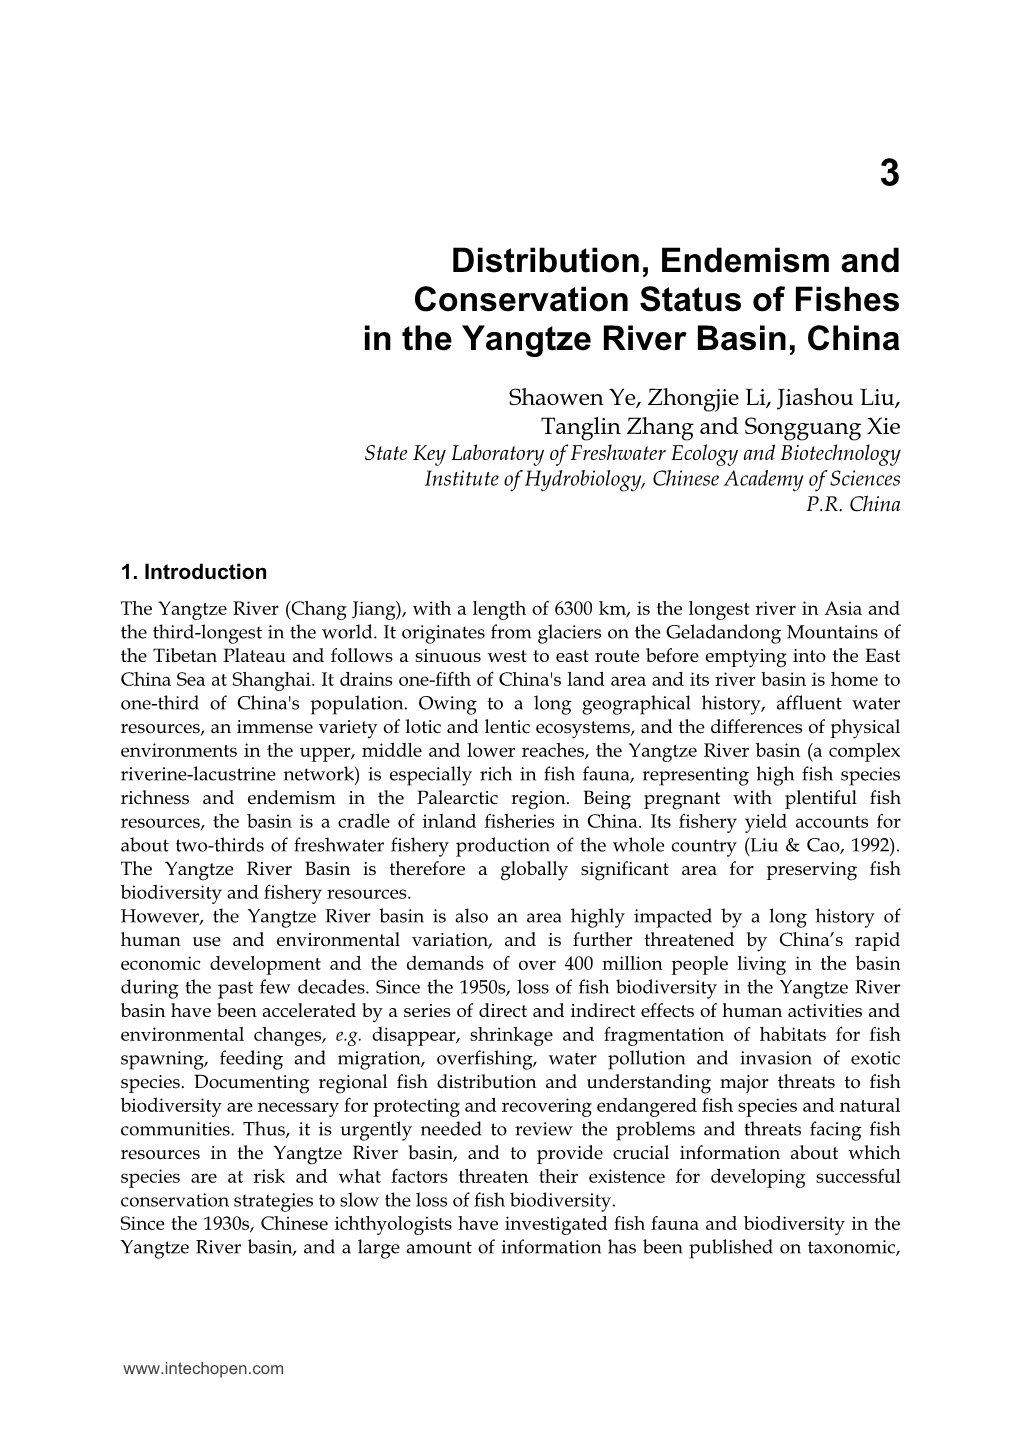 Distribution, Endemism and Conservation Status of Fishes in the Yangtze River Basin, China